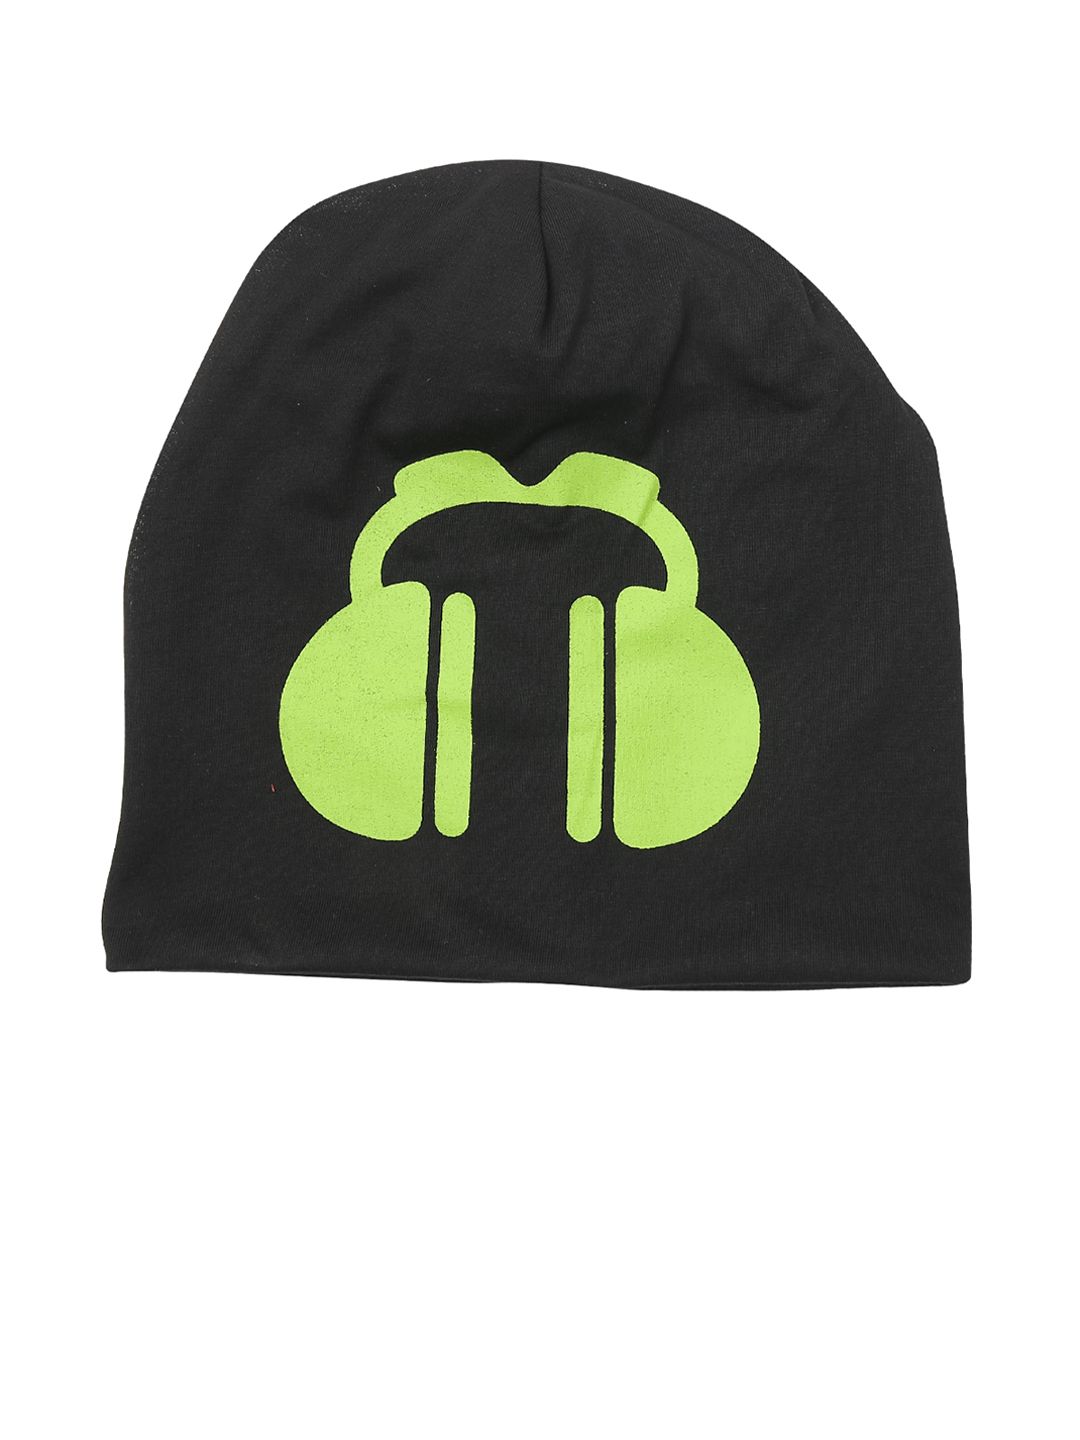 iSWEVEN Unisex Black & Green Printed Cotton Beanie Price in India